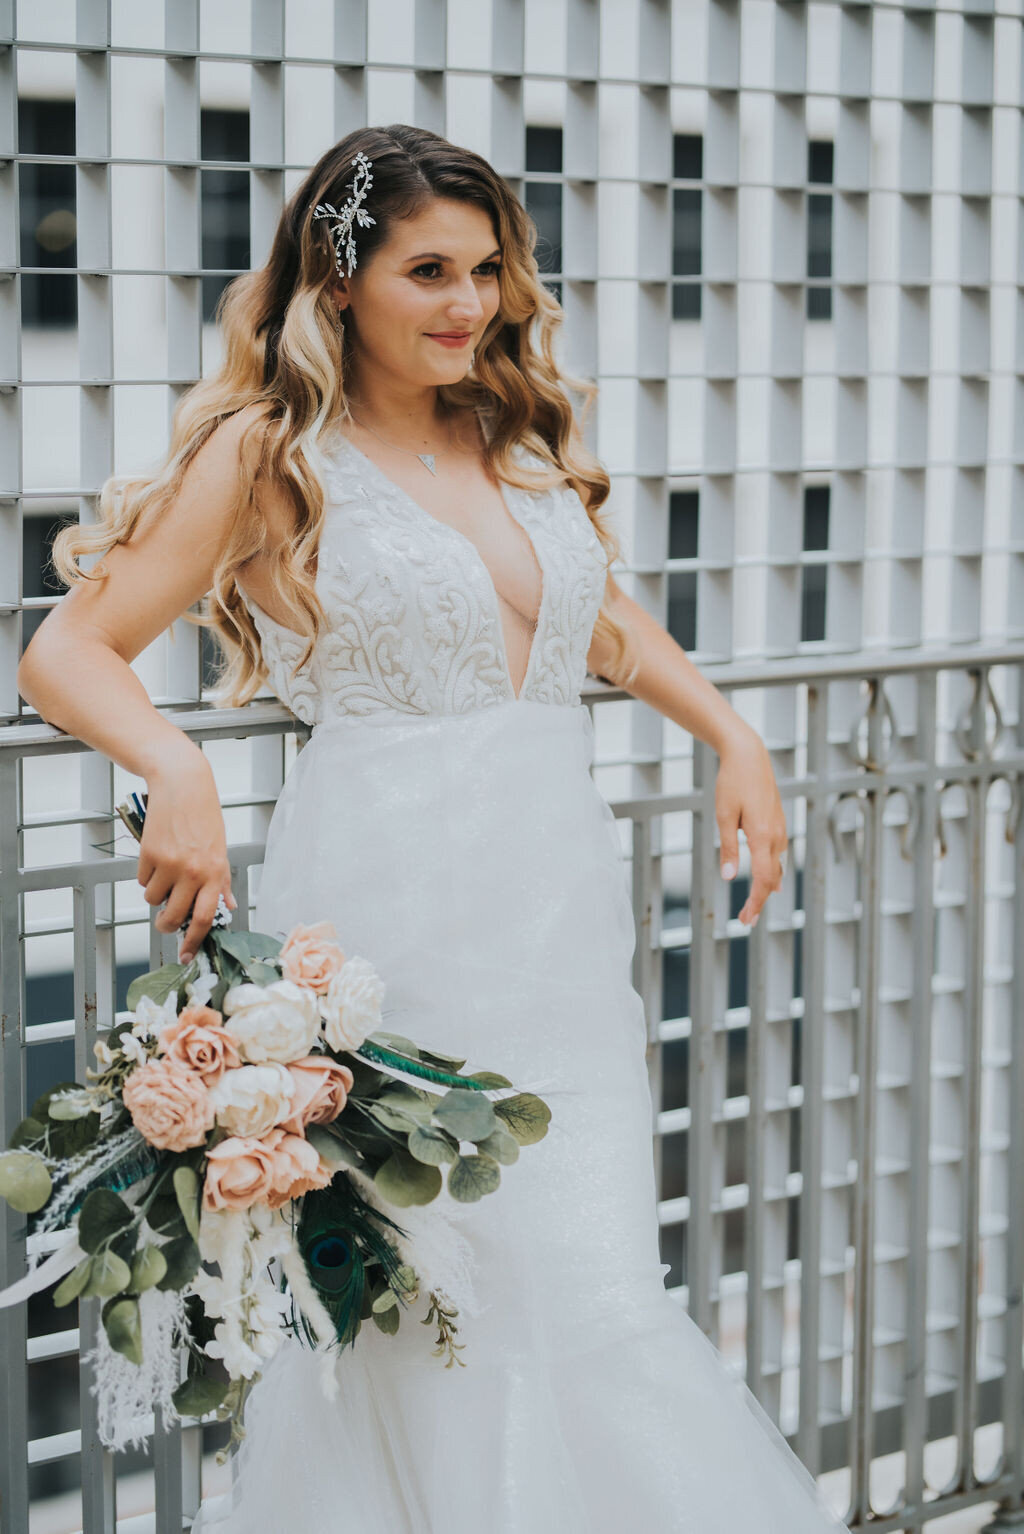 The Faven v-neck mermaid wedding dress style is sparkly and timeless bridal look by indie bridal designer Edith Elan.